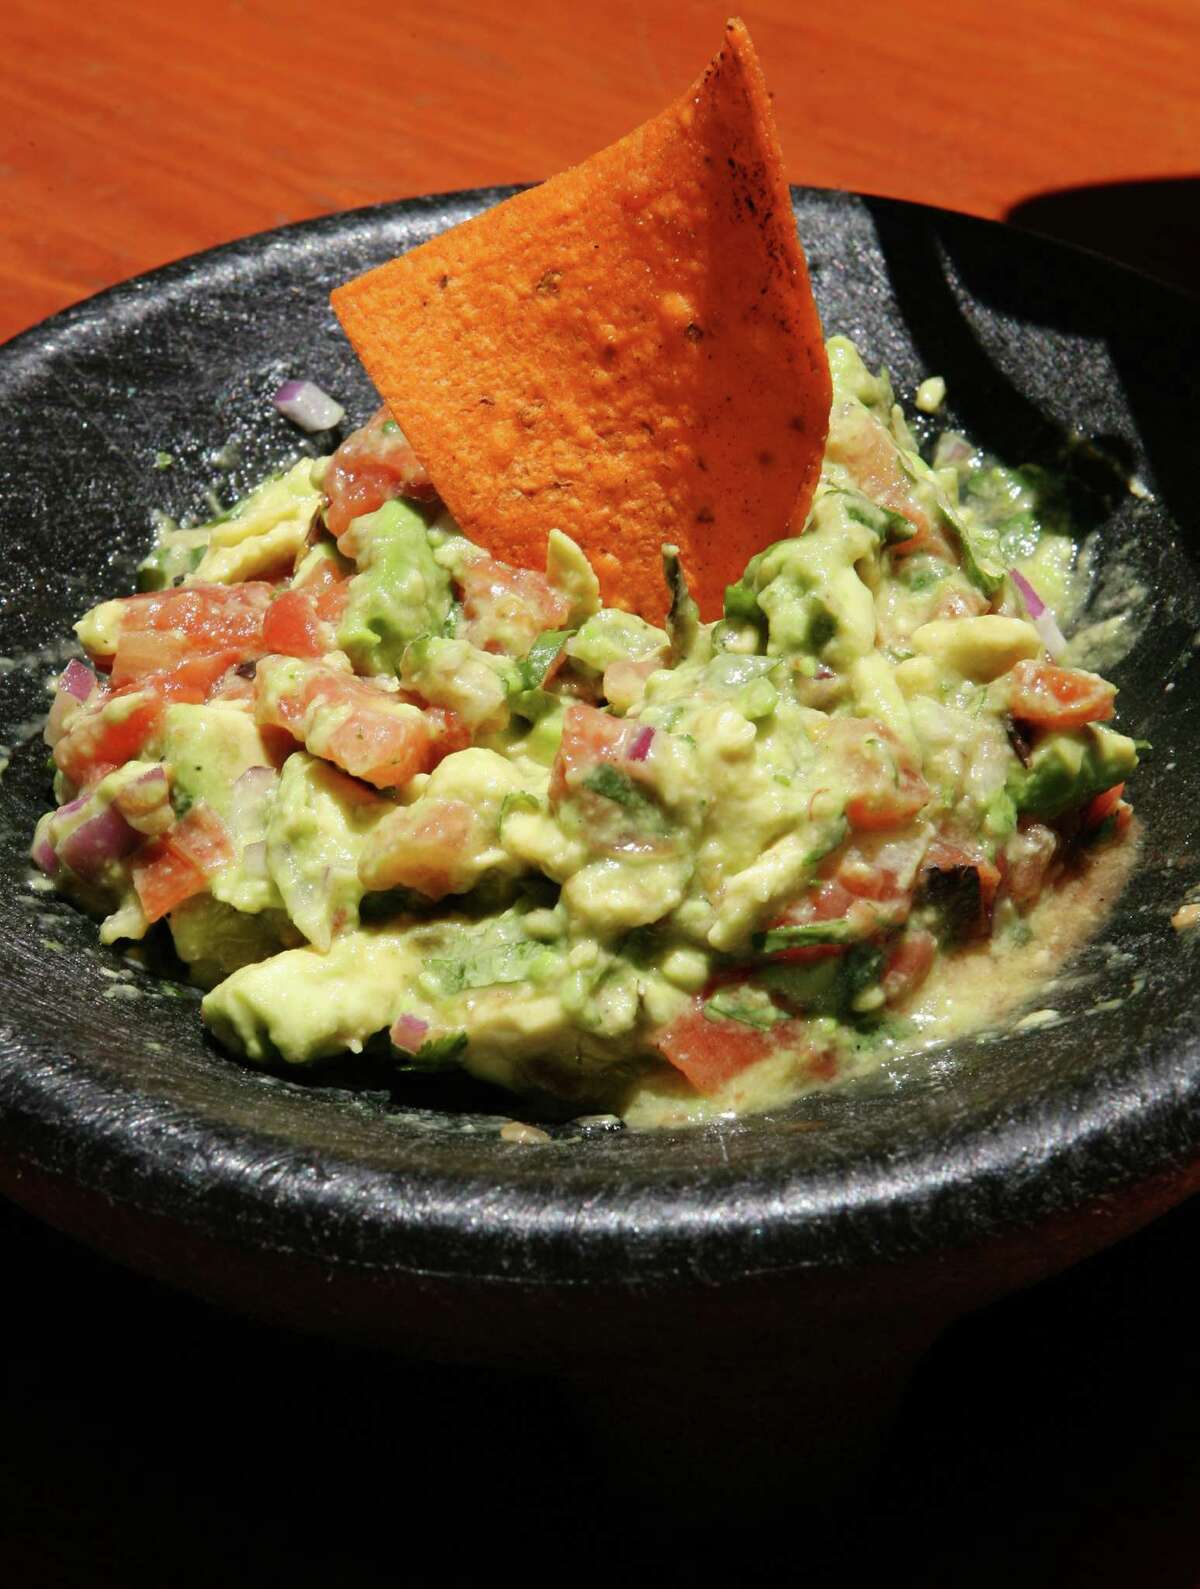 Guacamole made at tableside